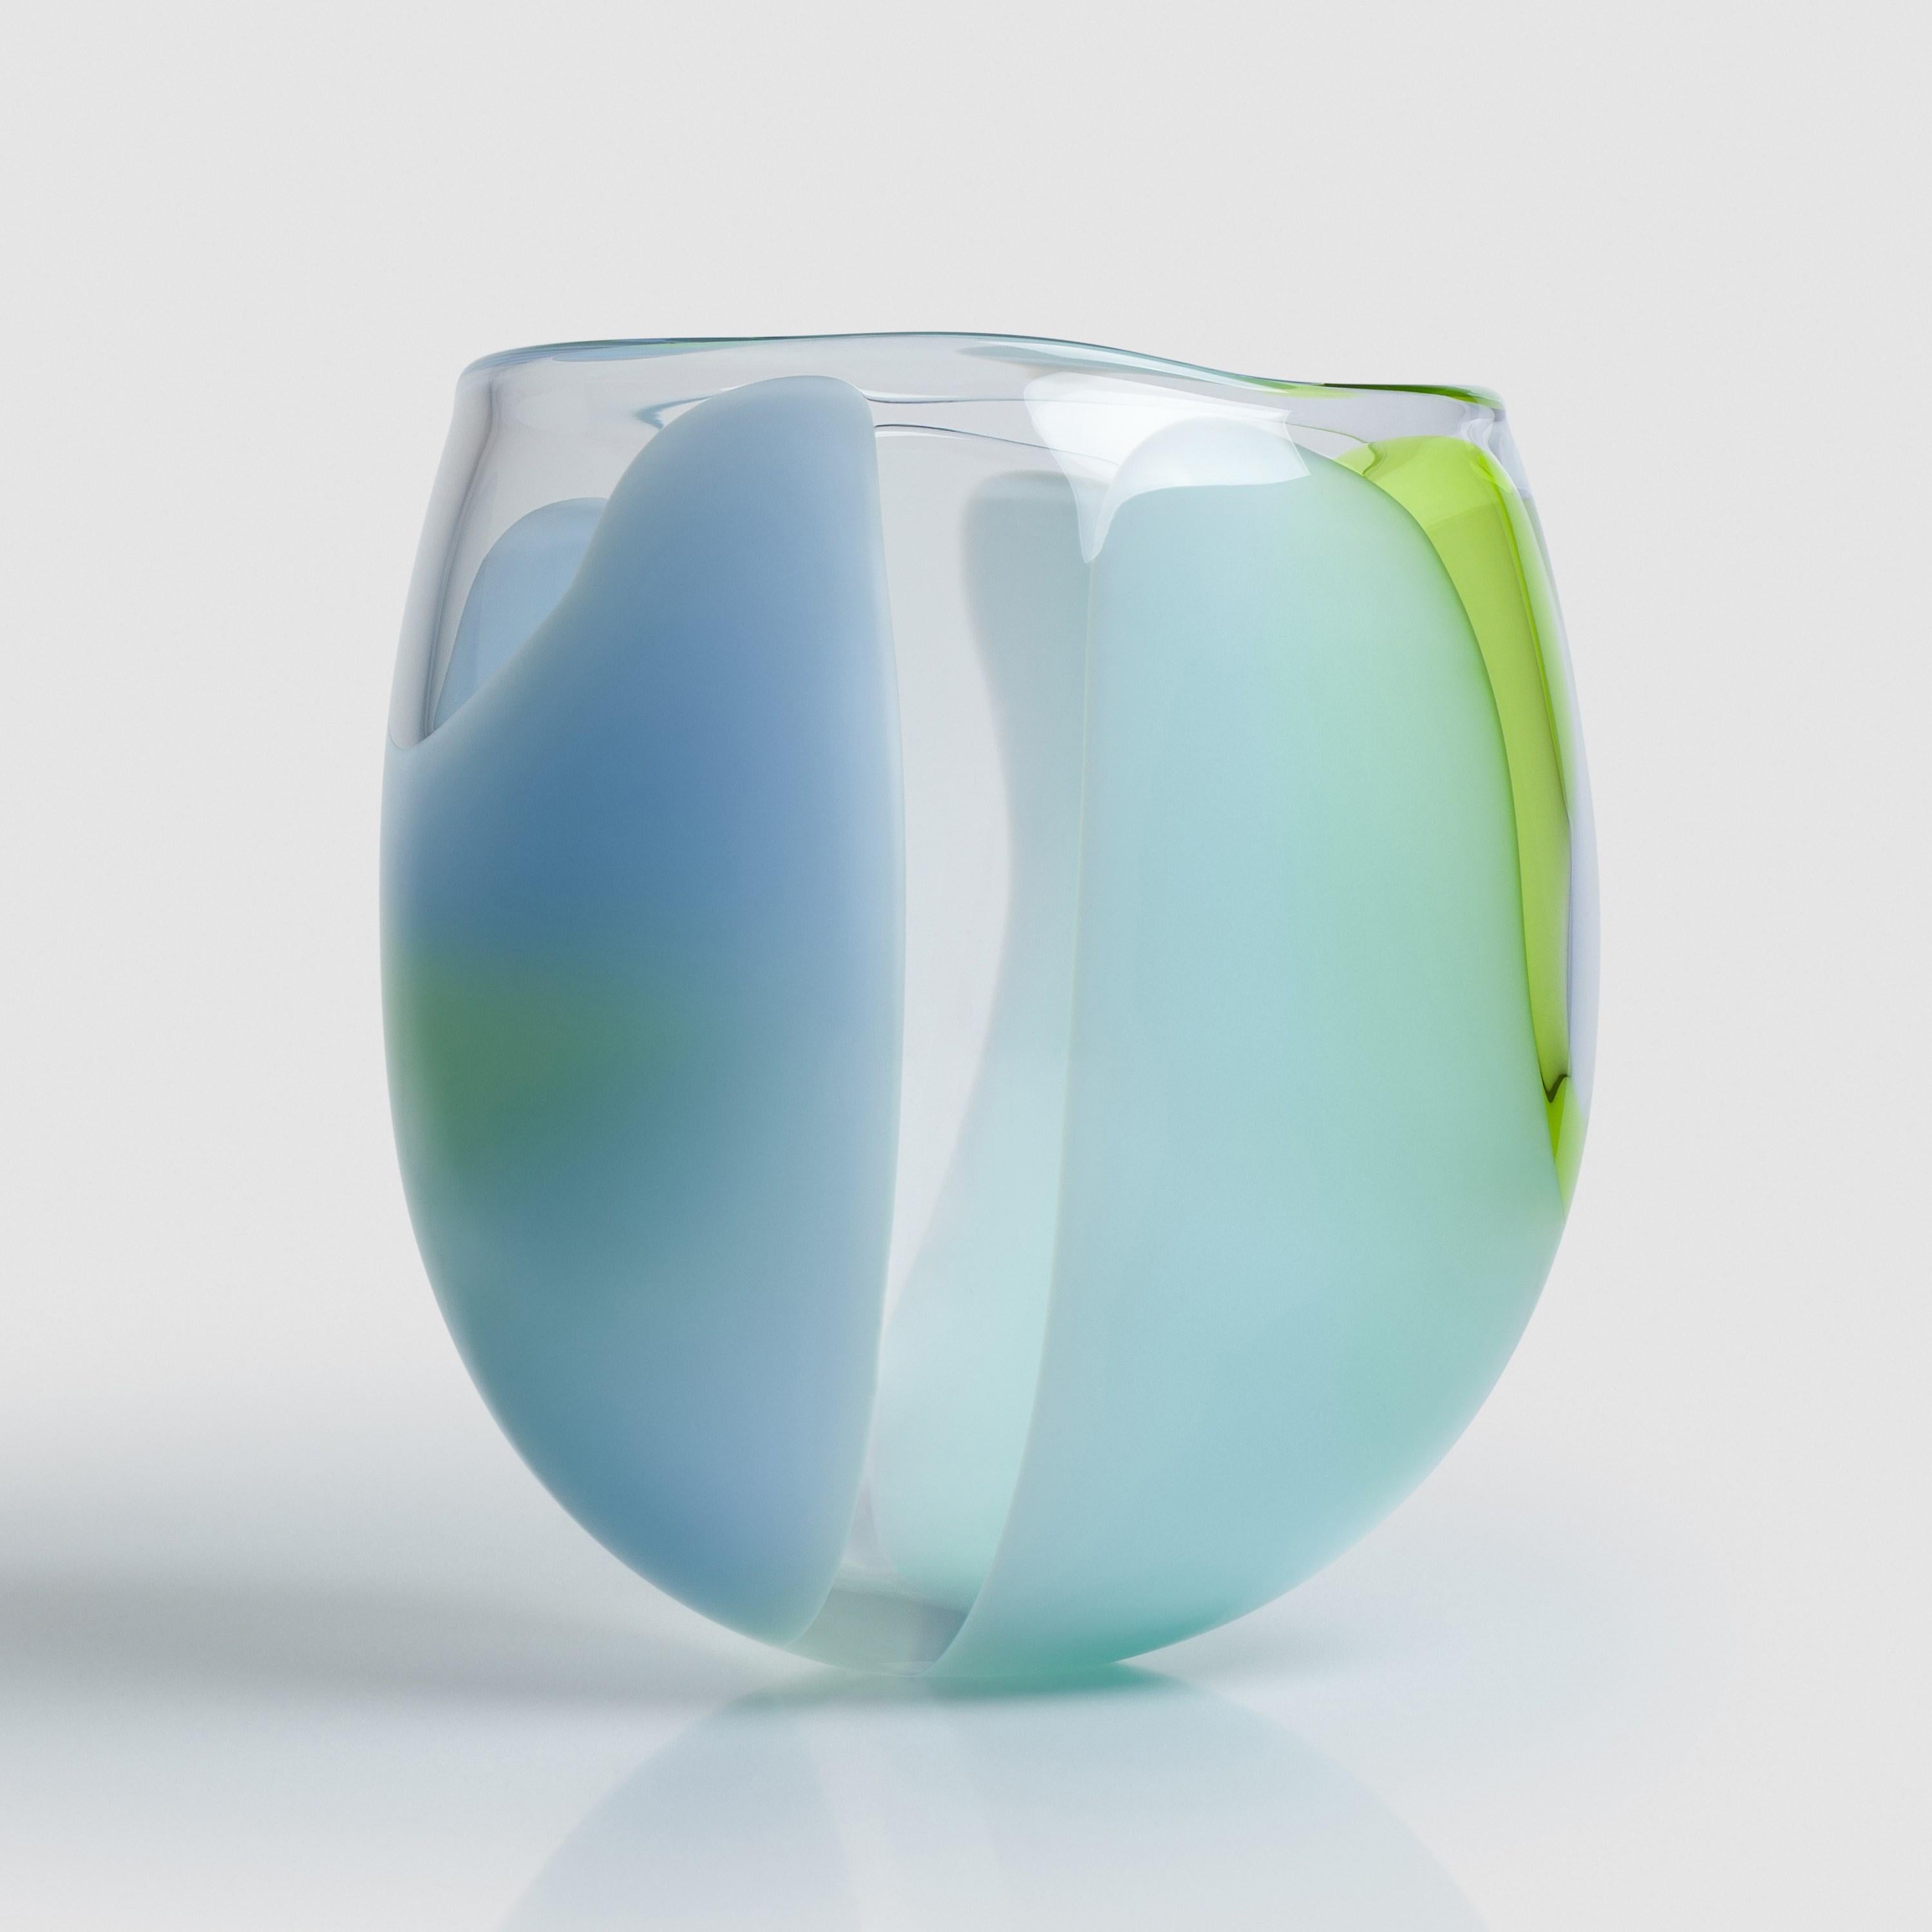 British Waves No 637 is a blue & lime handblown glass sculptural bowl by Neil Wilkin For Sale